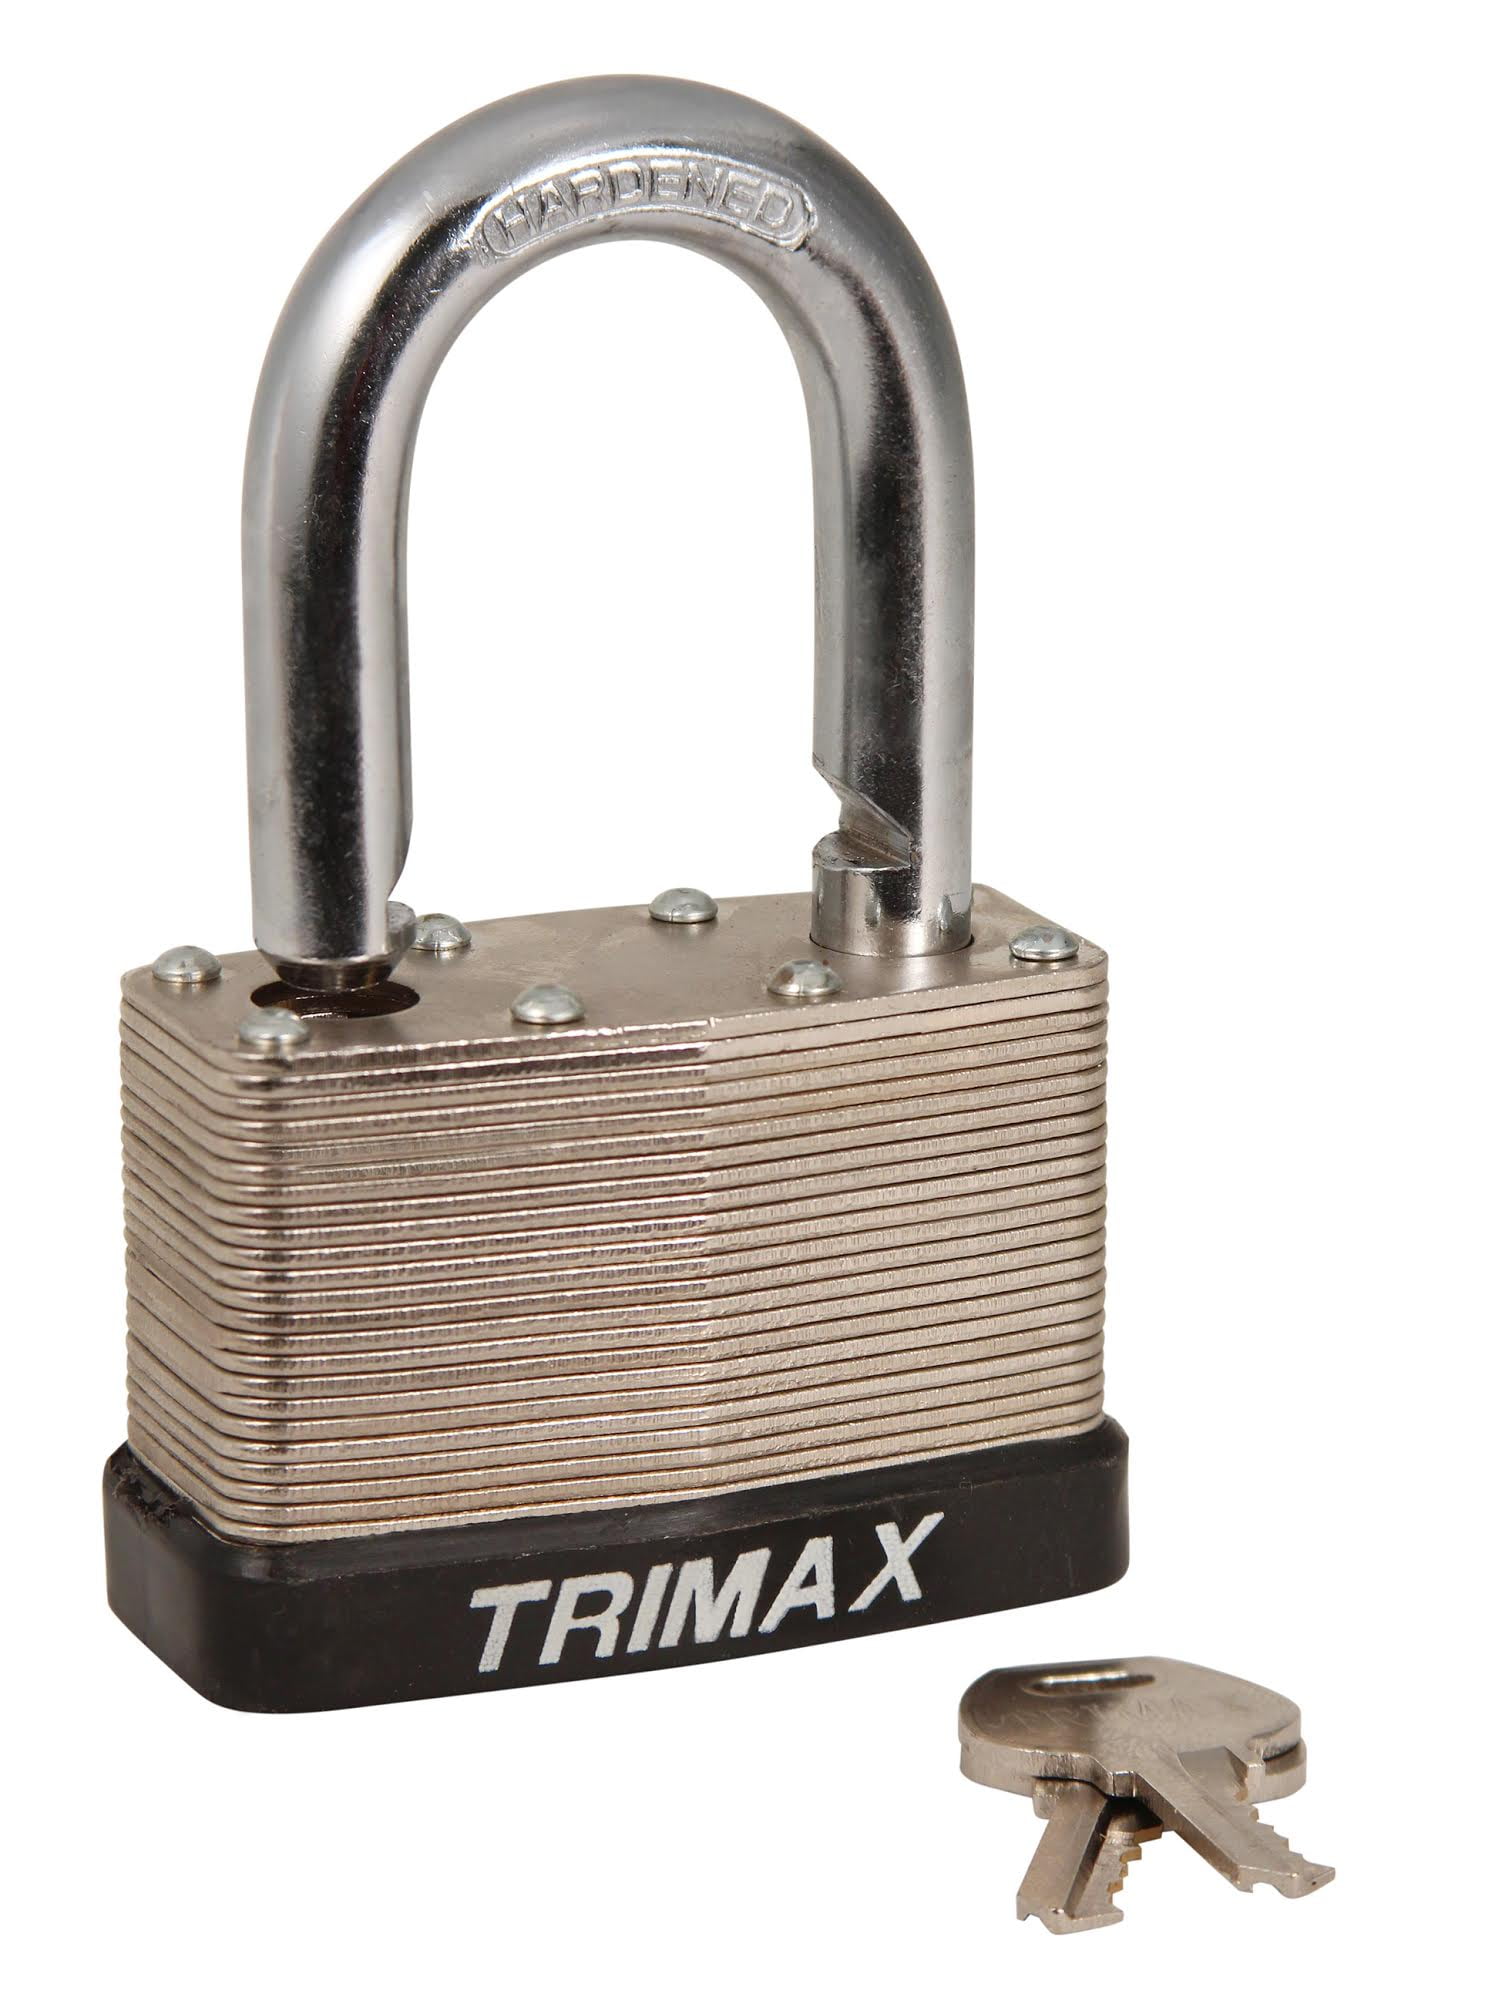 65mm Security Padlock with Protected Shackle & weather resistant coating 